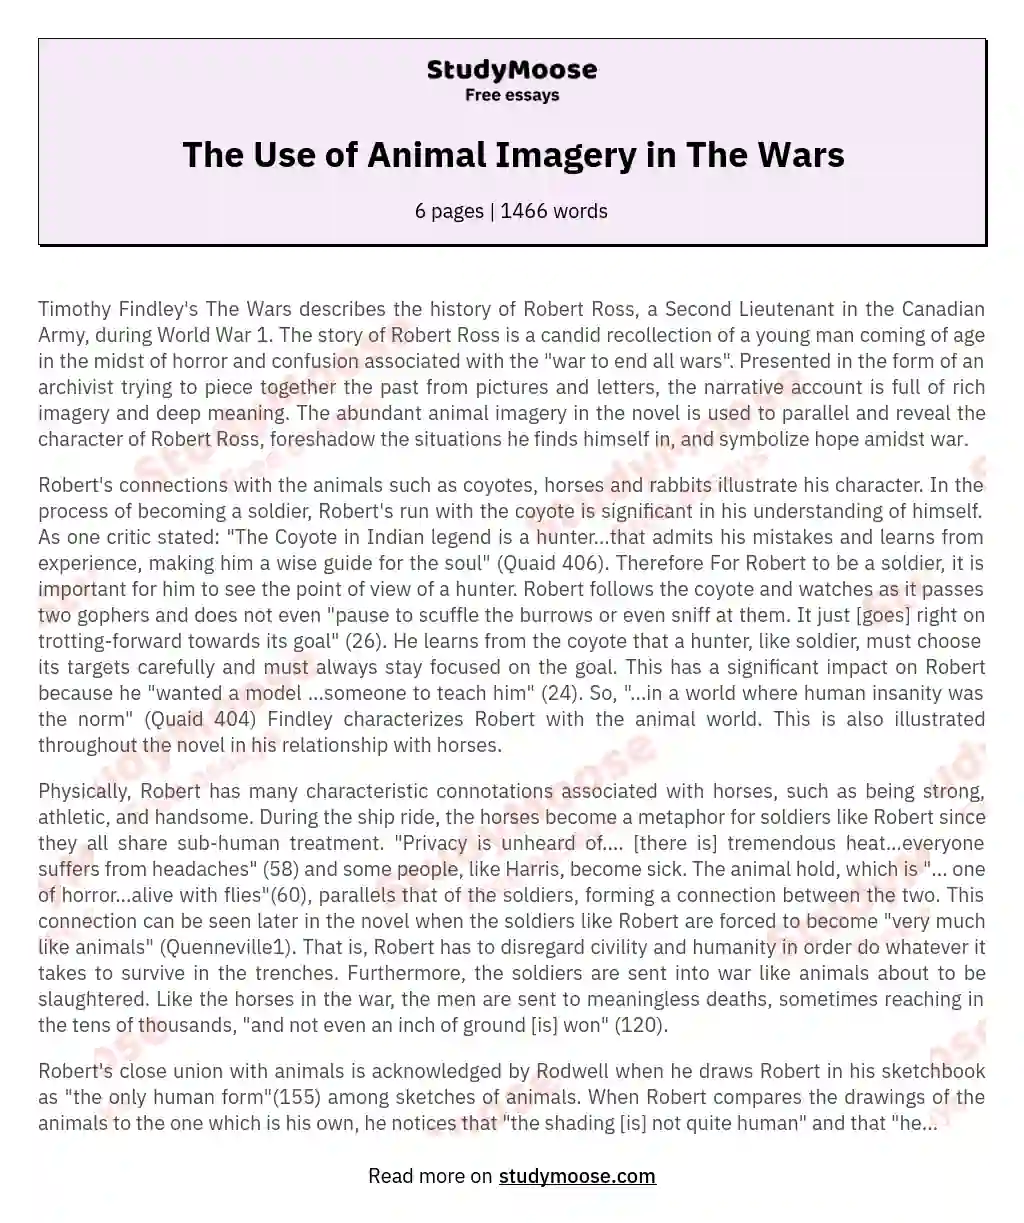 The Use of Animal Imagery in The Wars